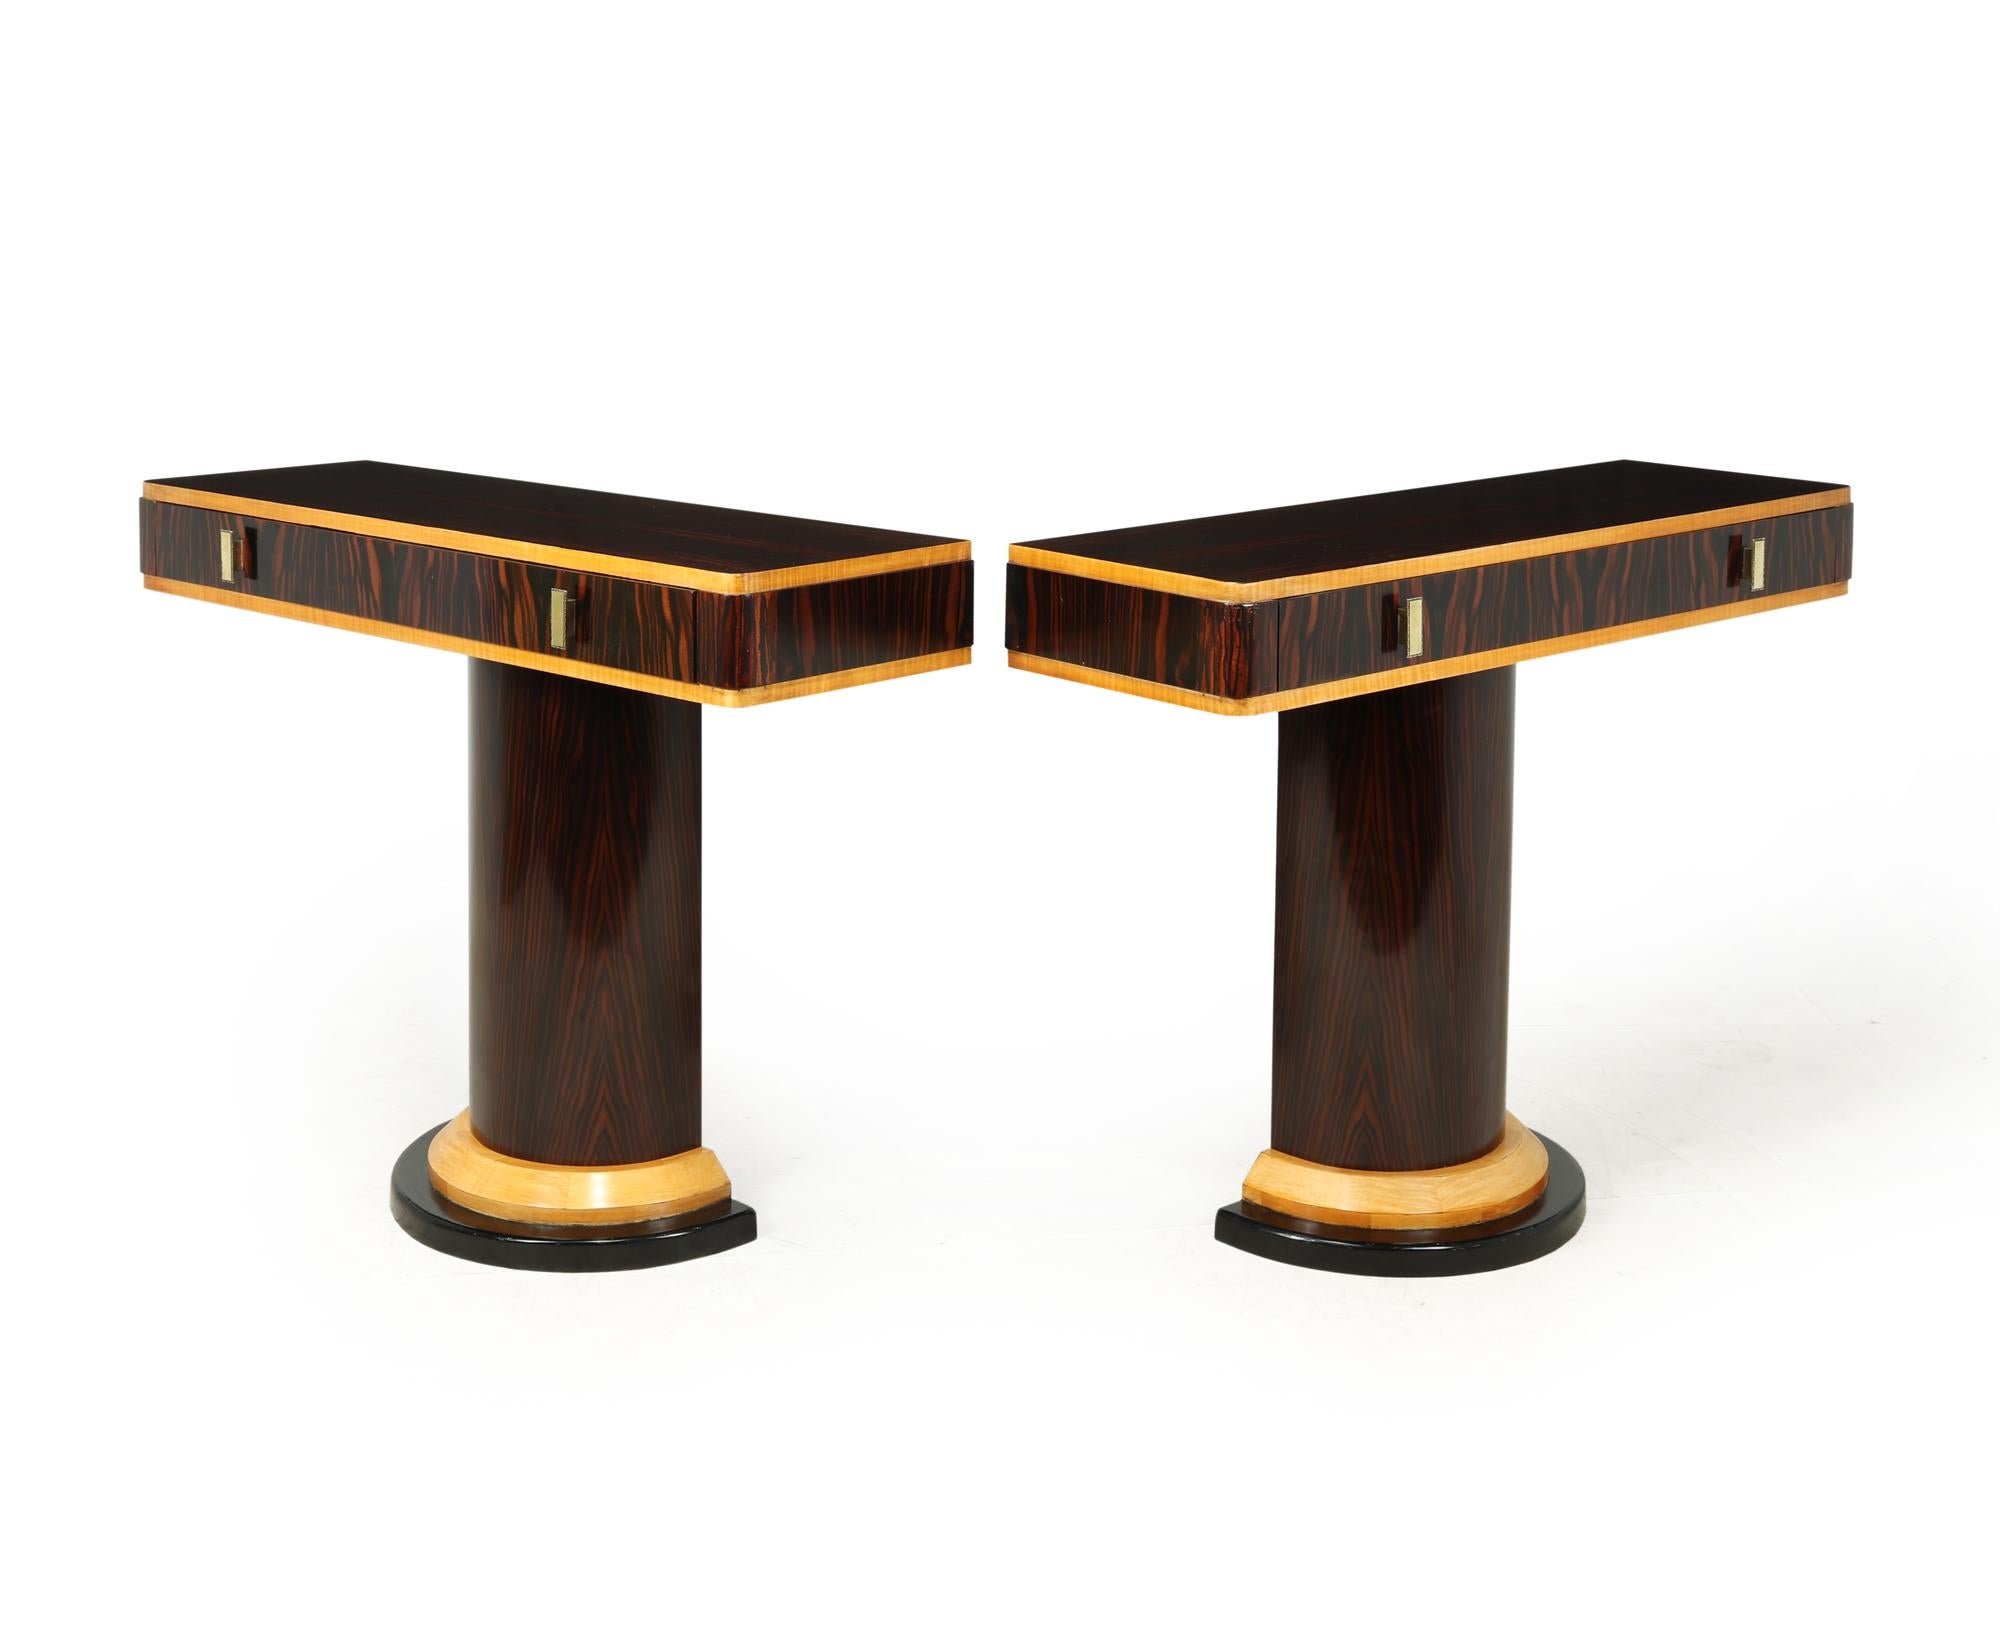 Early 20th Century Pair of French Art Deco Console Tables in Macassar Ebony, c1925